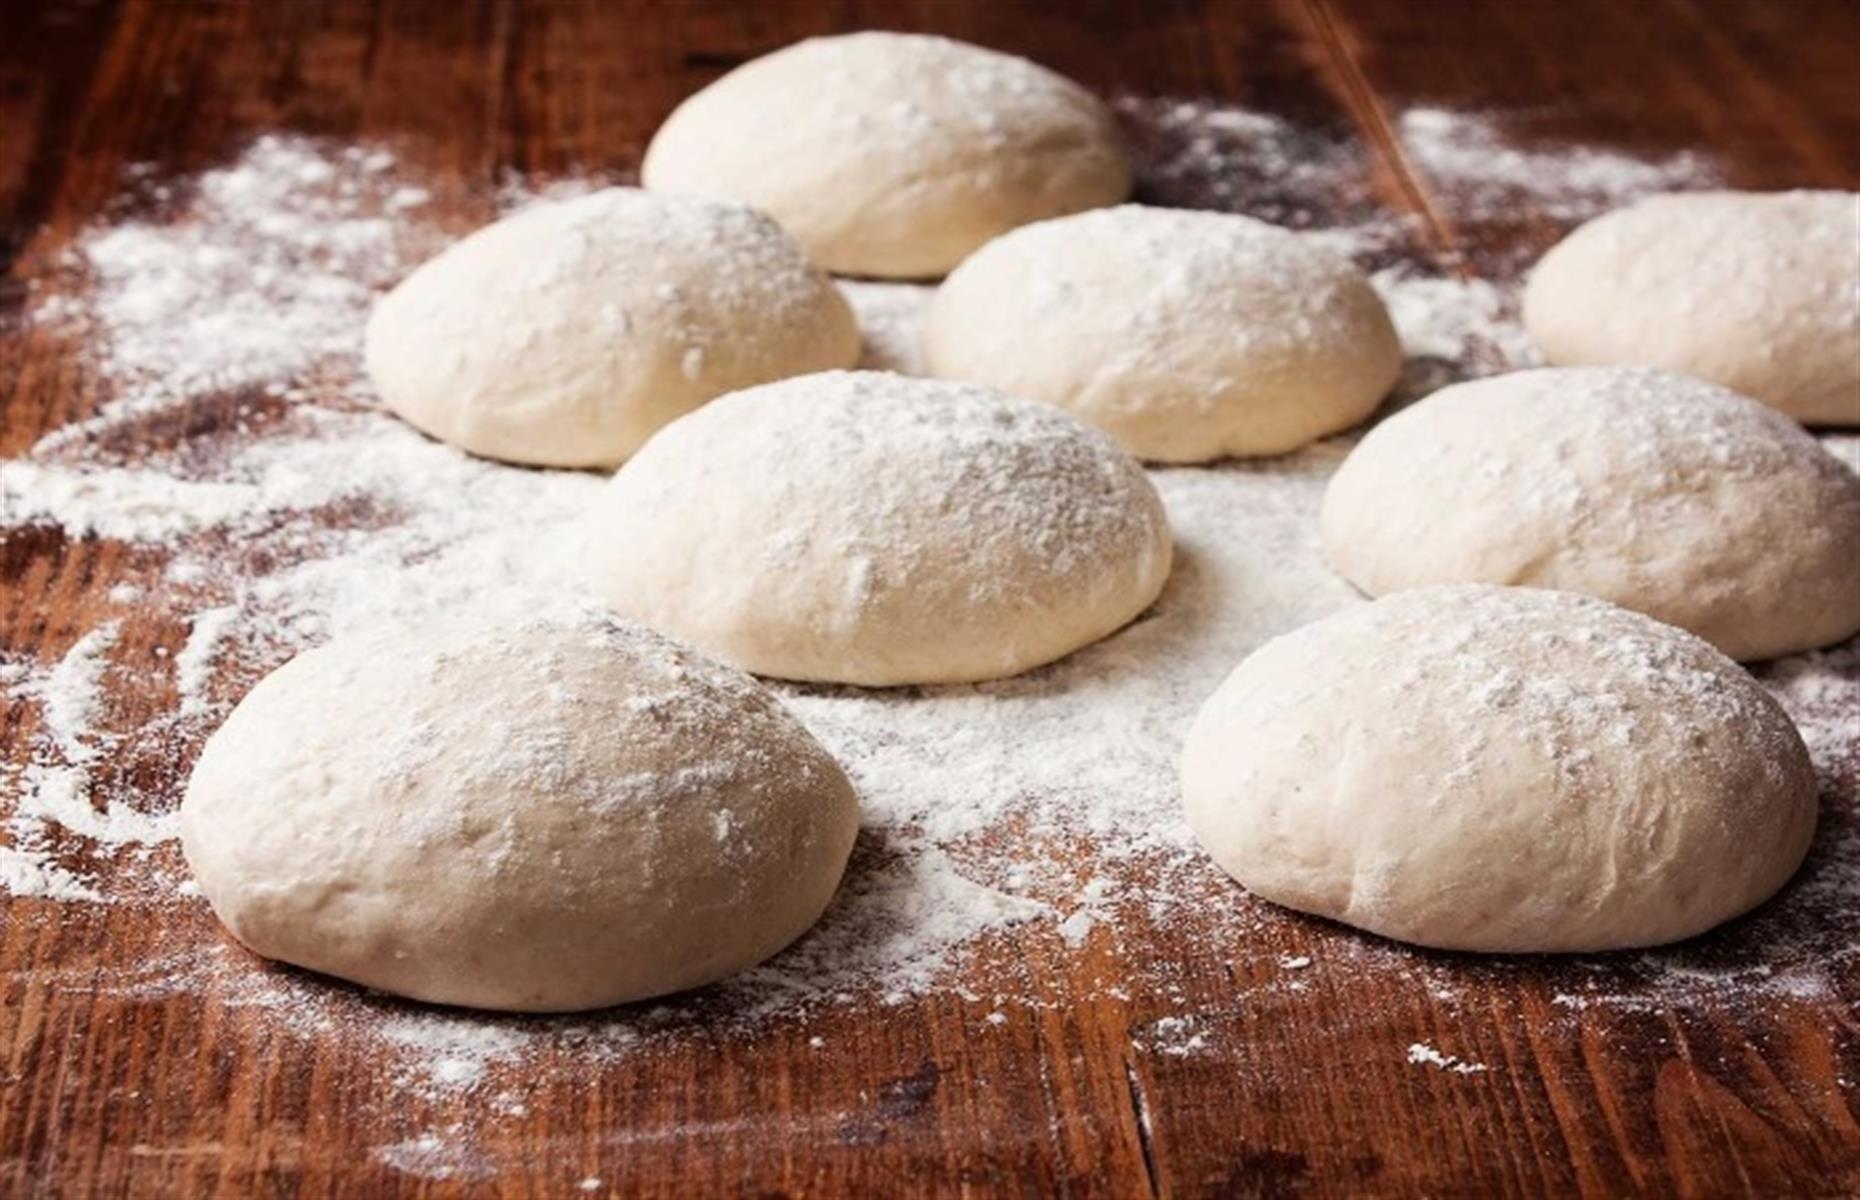 Once the dough is ready to shape into pizzas, it will be stretchy and pliable, so you can pull it into shape with your hands. Otherwise, use a rolling pin to start with. It should be uniform in thickness all over, and it's easy to coax it into being even by simply pulling the dough.